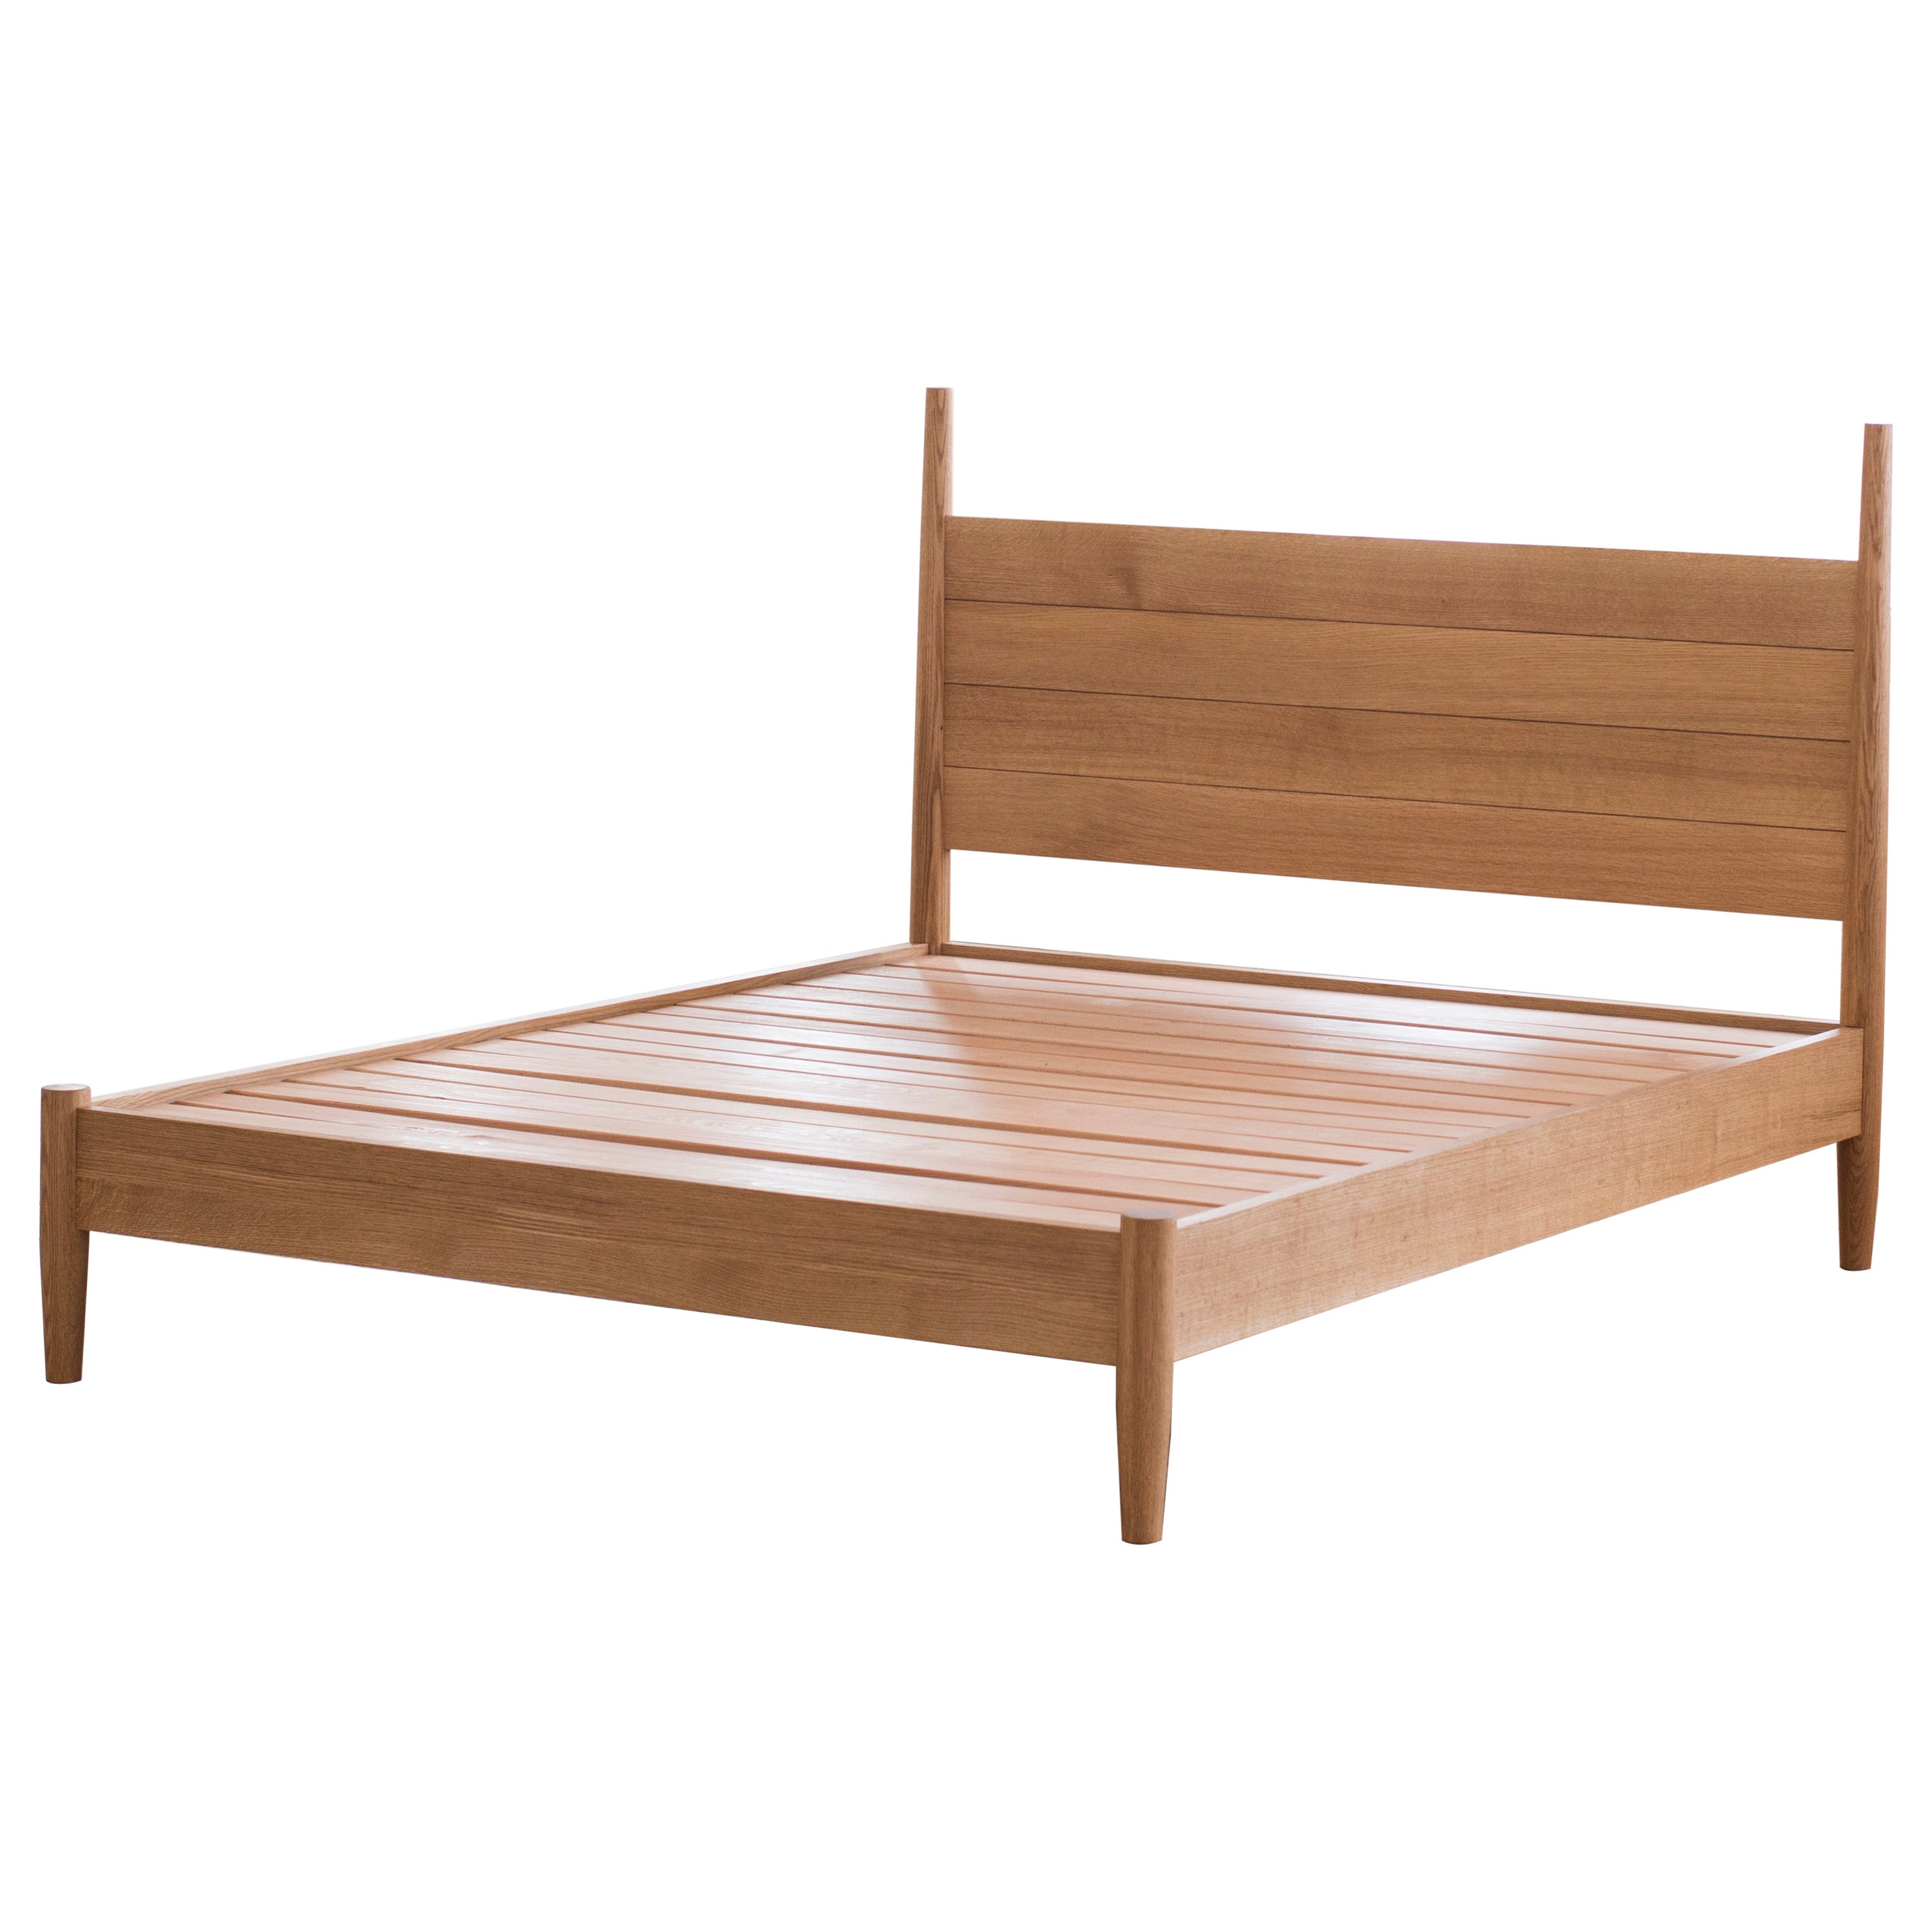 Joseph Bed Queen Size, Handcrafted Solid Wood Post Bed Frame For Sale